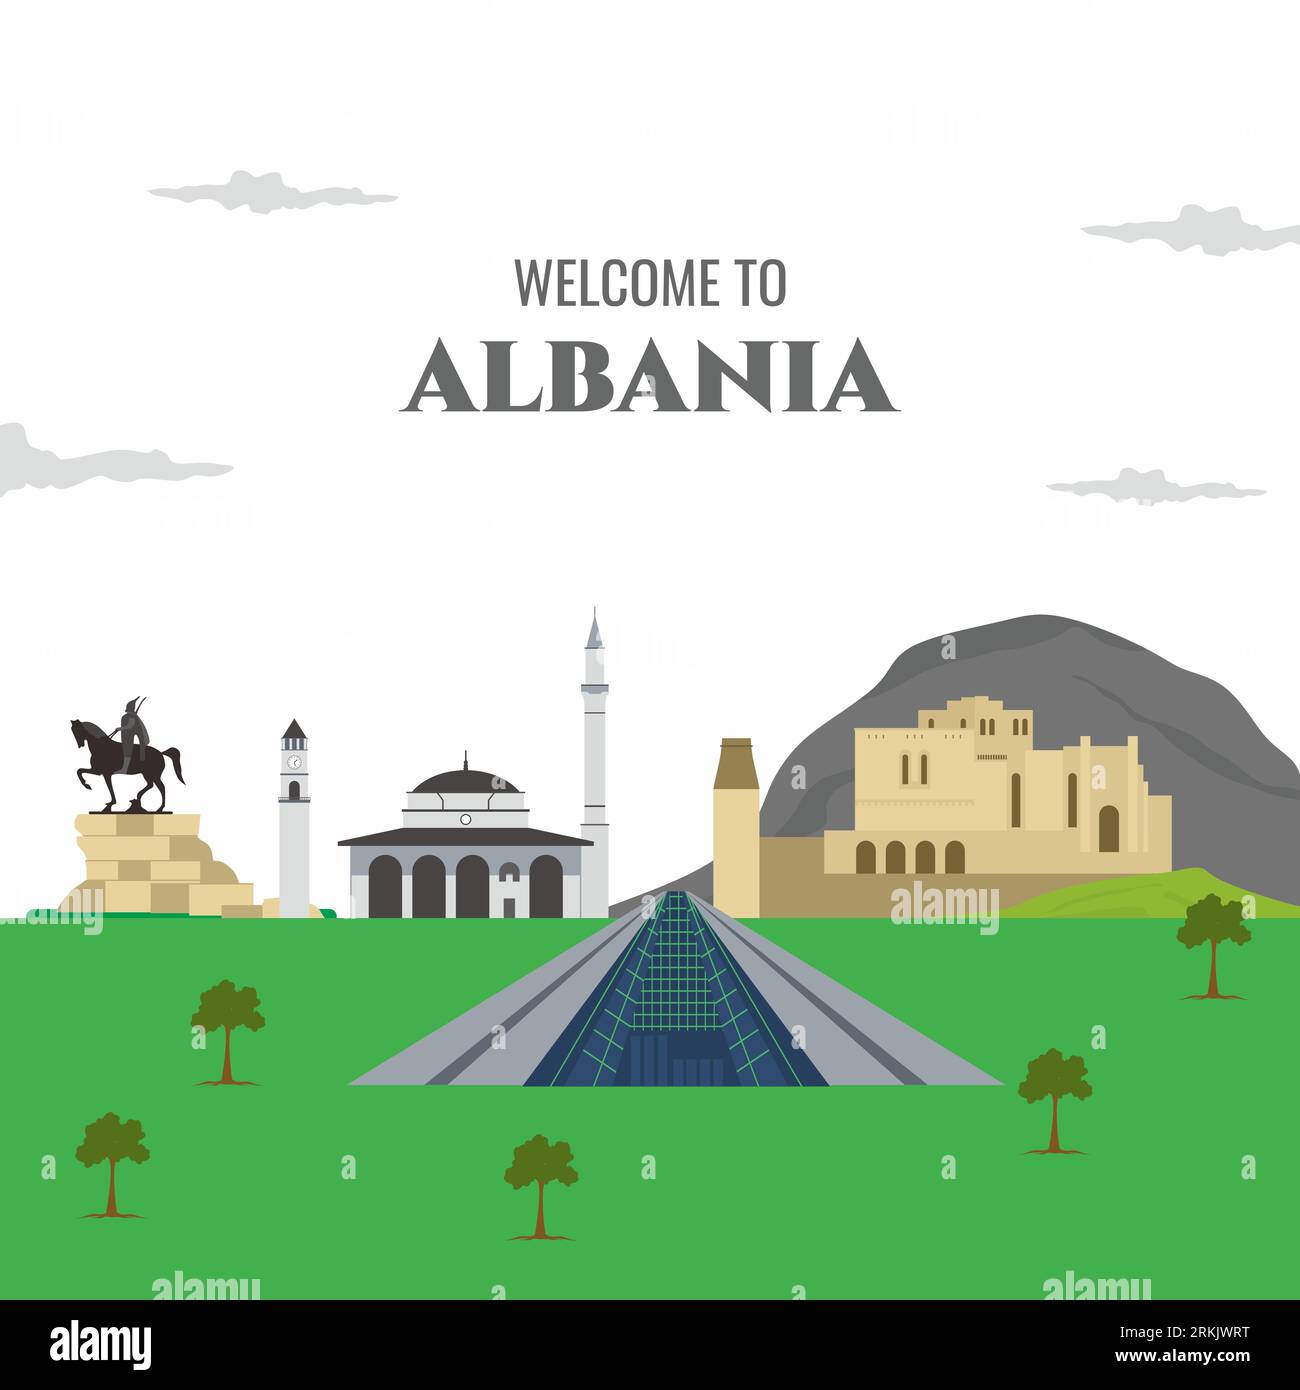 Vector flat cartoon Albania landmark building. Welcome to Albania. Tirana tourist attractions. Design elements for banner, infographic poster, busines Stock Vector